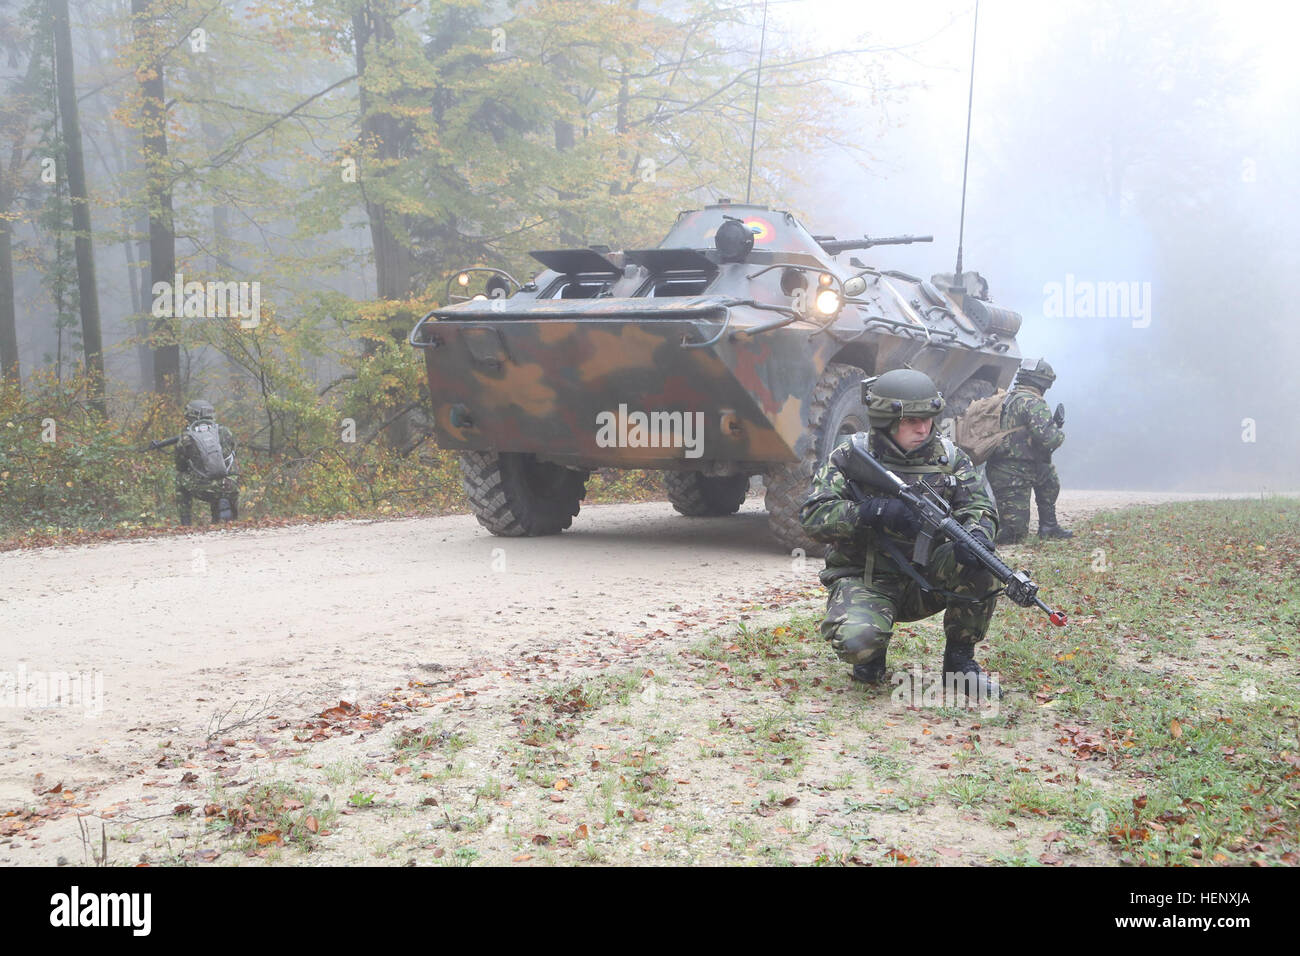 Romanian soldiers of Bravo Company, Infantry Battalion provide security next to a TABC-79 armored personnel carrier during exercise Combined Resolve III at the Joint Multinational Readiness Center in Hohenfels, Germany, Oct. 25, 2014.  Combined Resolve III is a multinational exercise, which includes more than 4,000 participants from NATO and partner nations, and is designed to provide a complex training scenario that focuses on multinational unified land operations and reinforces the U.S. commitment to NATO and Europe. (U.S. Army photo by Sgt. Ian Schell/Released) Combined Resolve III 141025-A Stock Photo